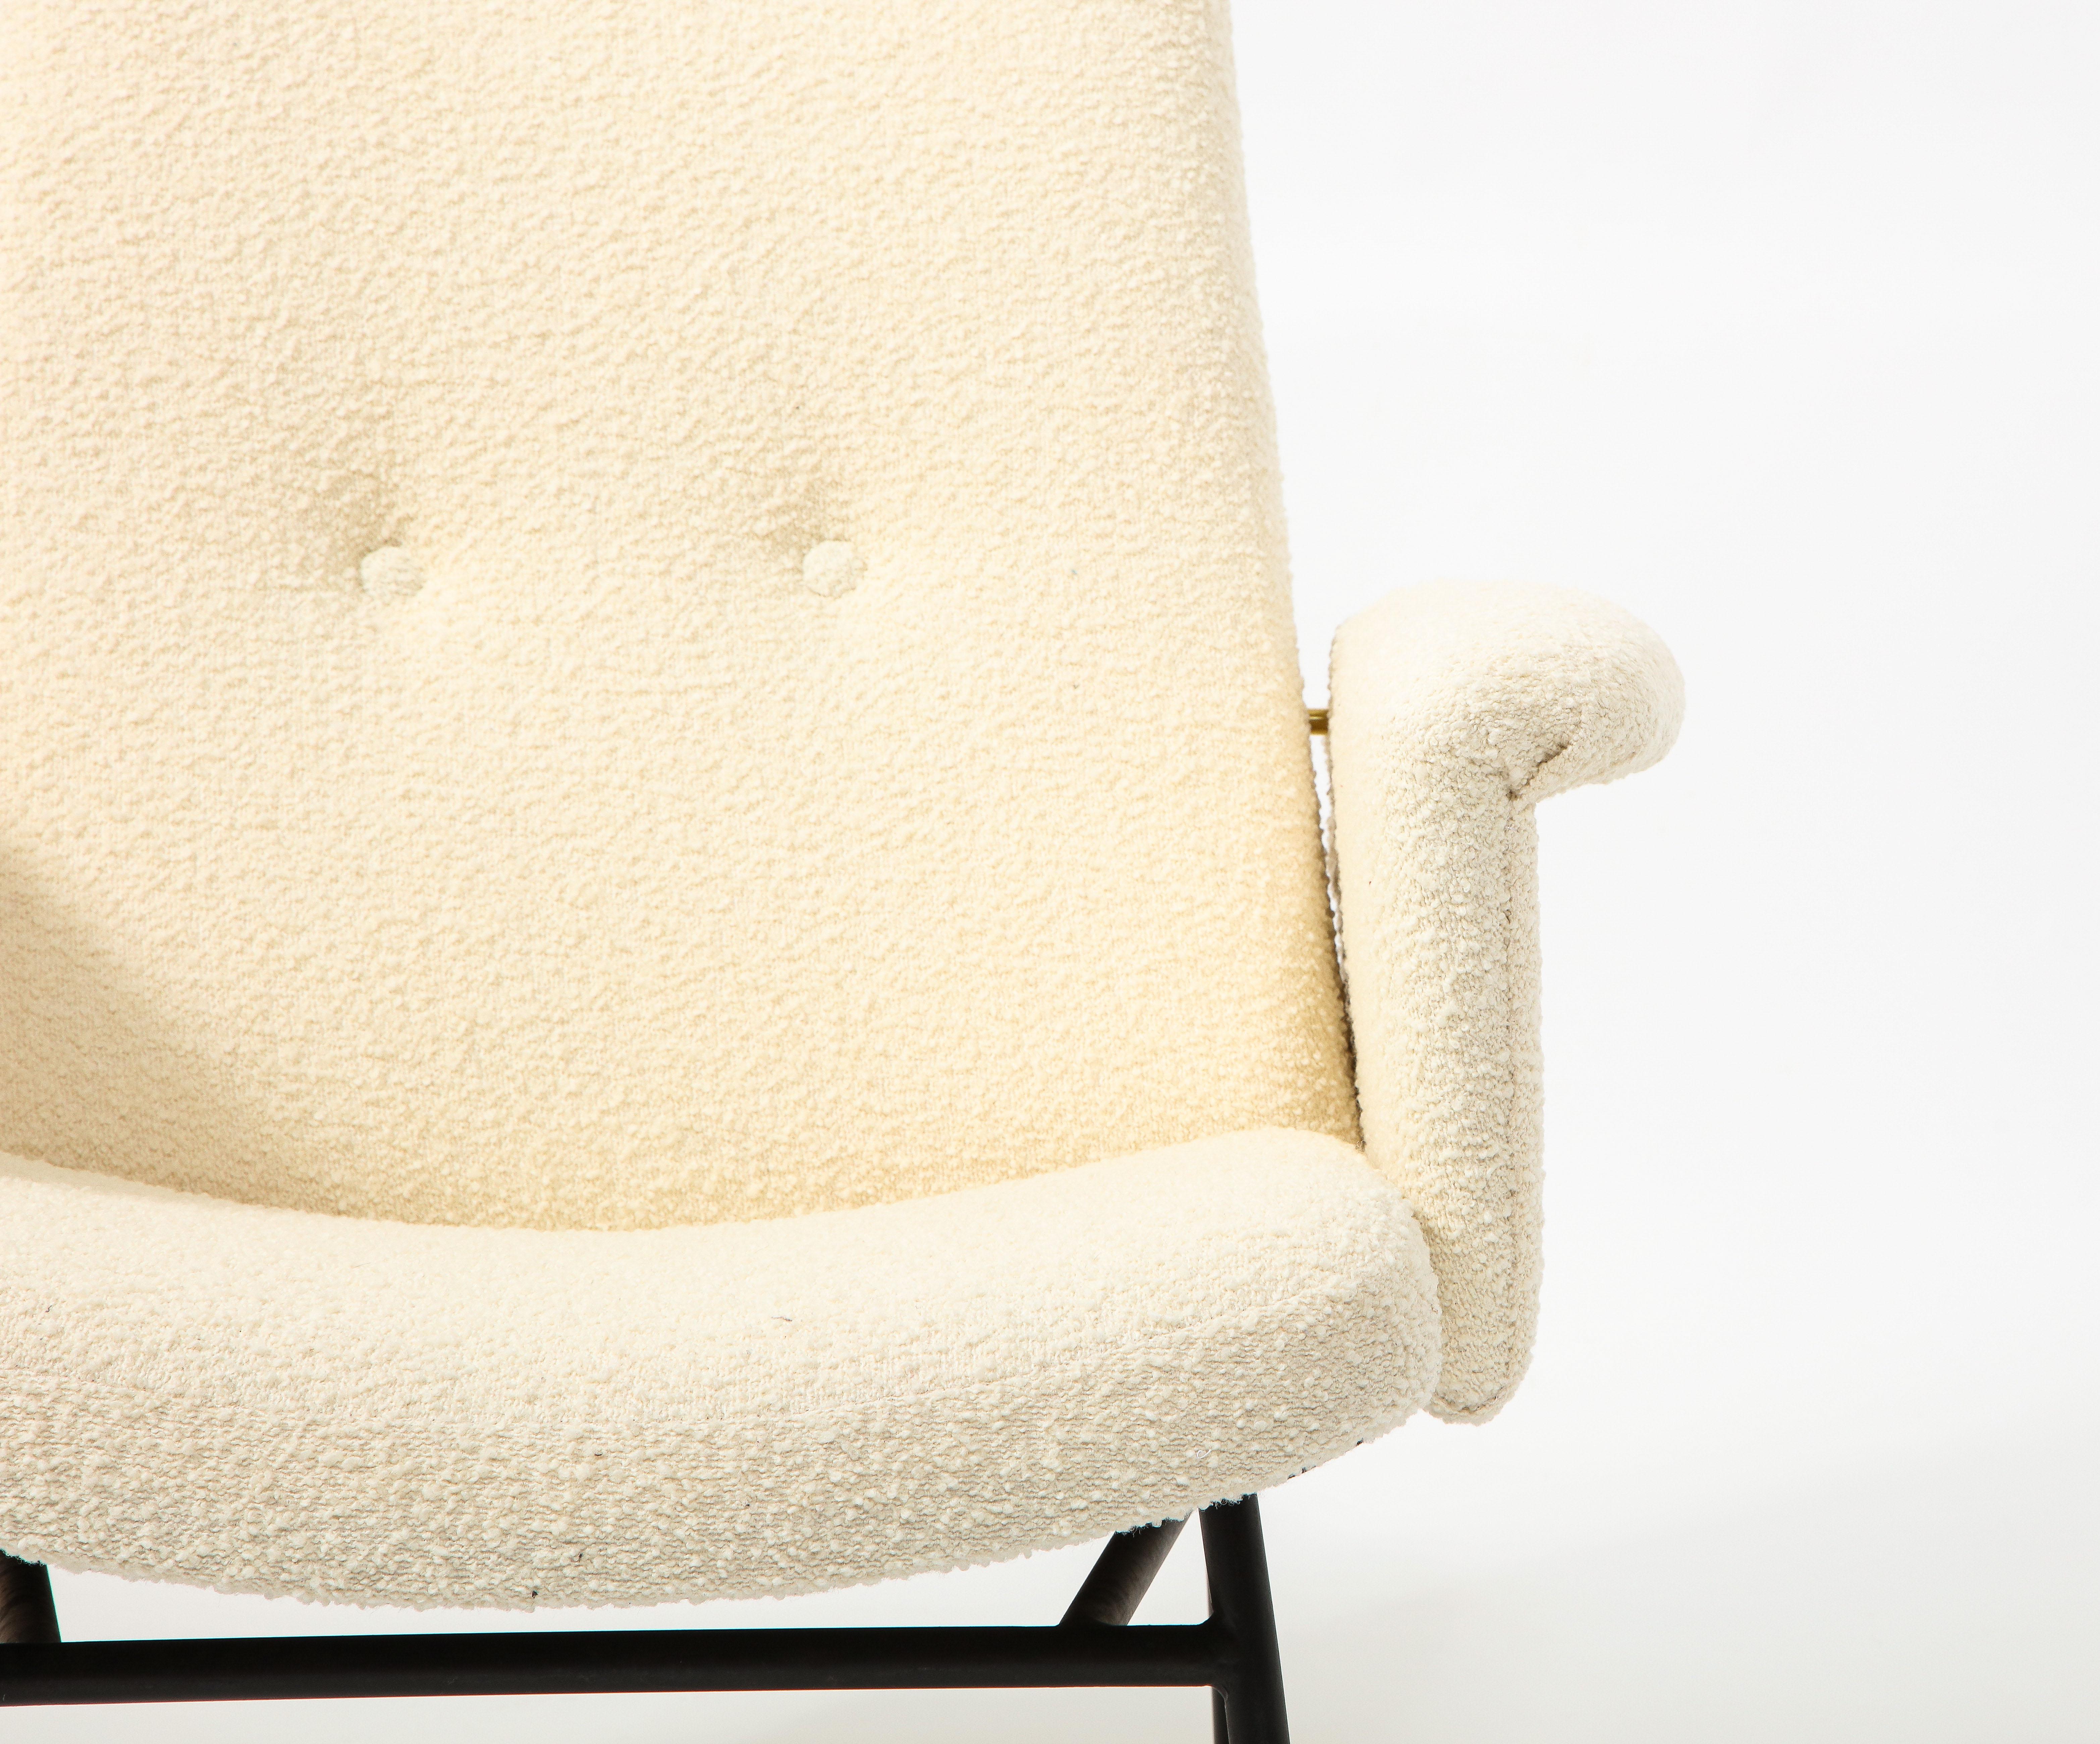 Pierre Guariche SK660 Armchairs in Cream Bouclé, France 1960’s In Fair Condition For Sale In New York, NY